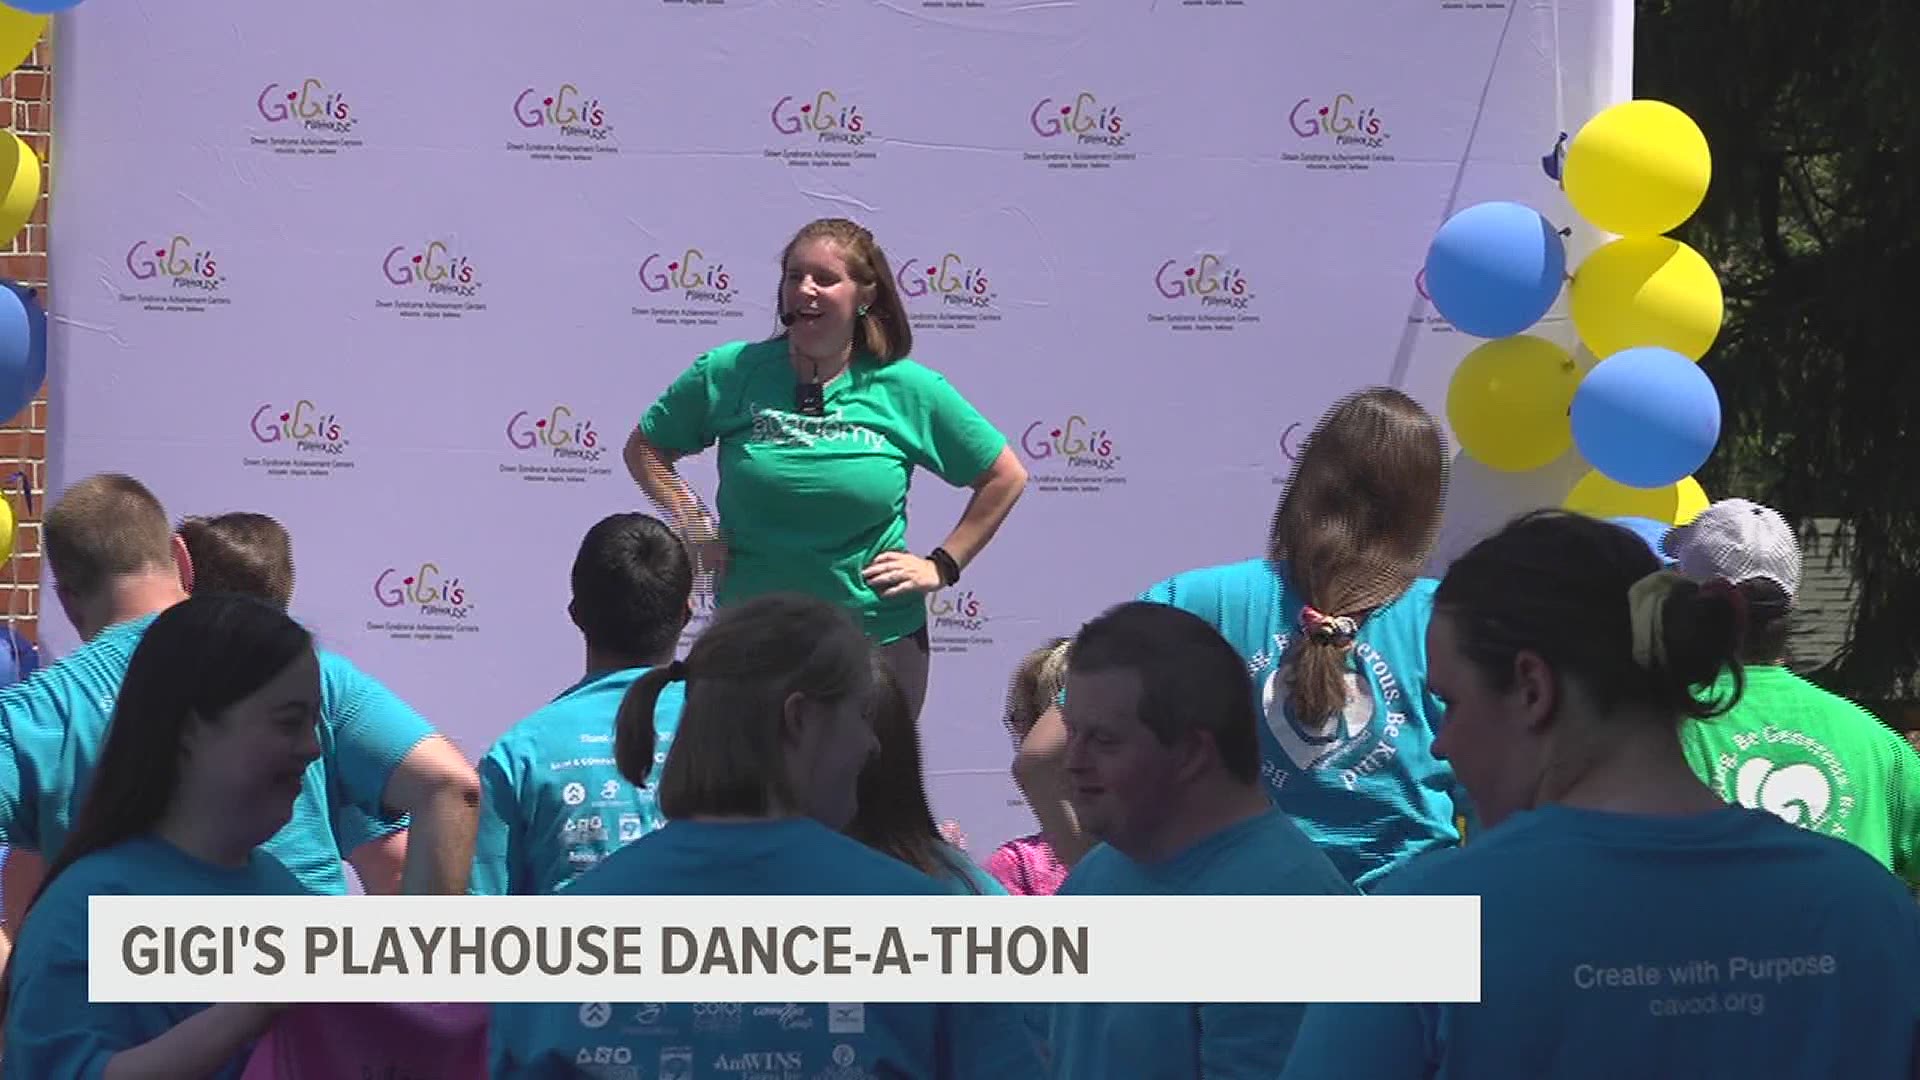 Gigi's Playhouse Lancaster hosted a Dance-a-Thon for acceptance of individuals of all abilities.